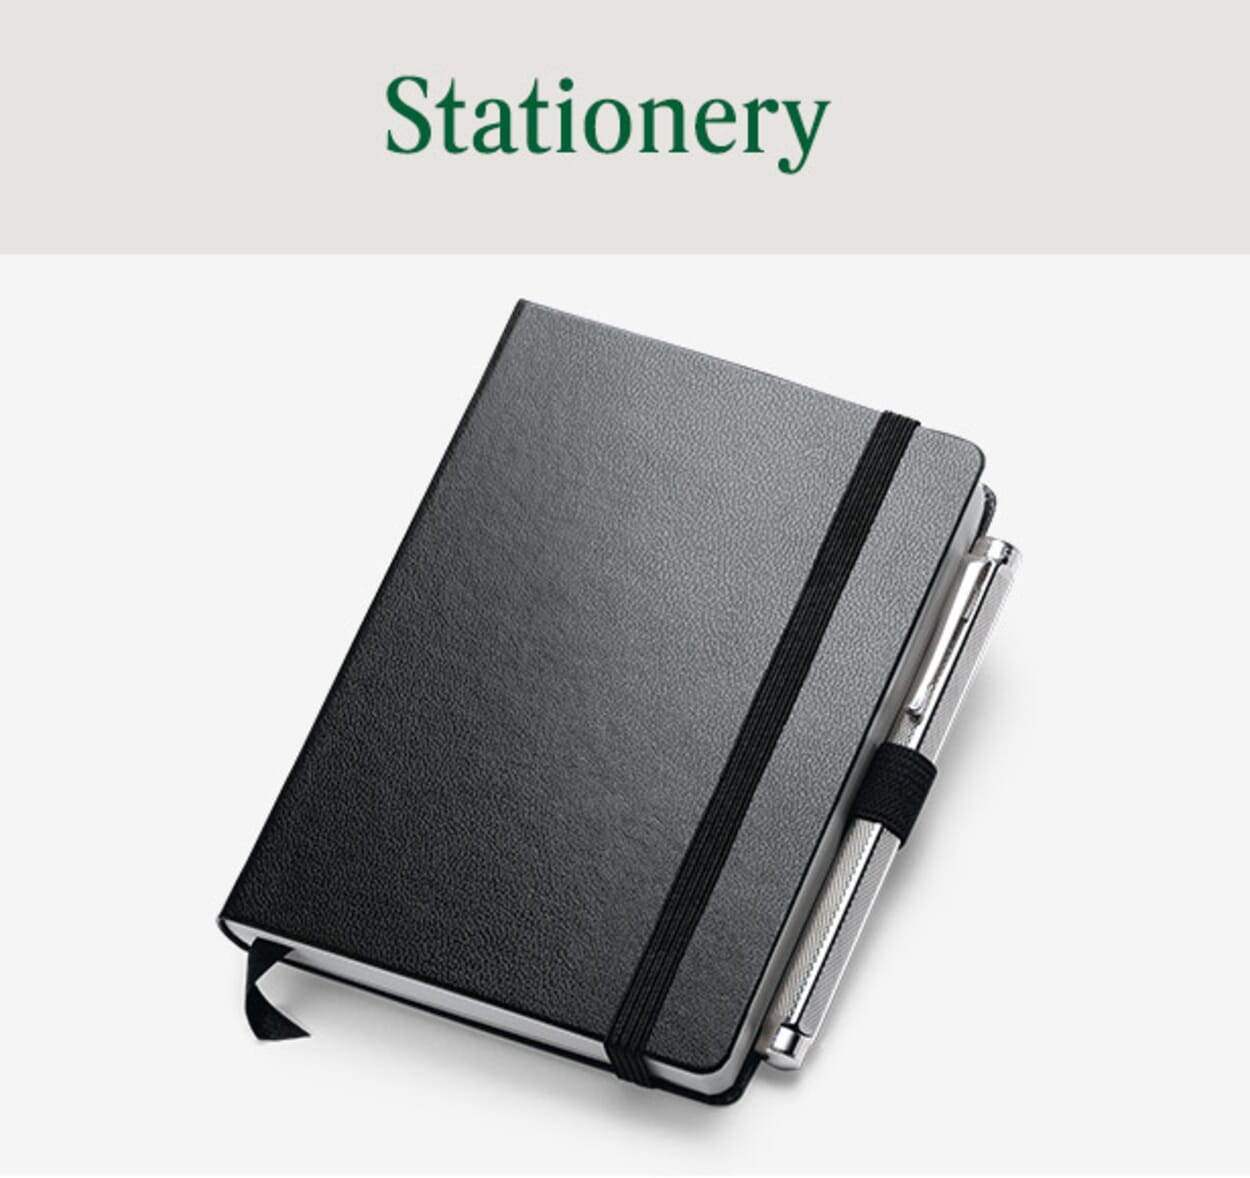 High Quality Office Supplies Manufactum, Leather Office Supplies